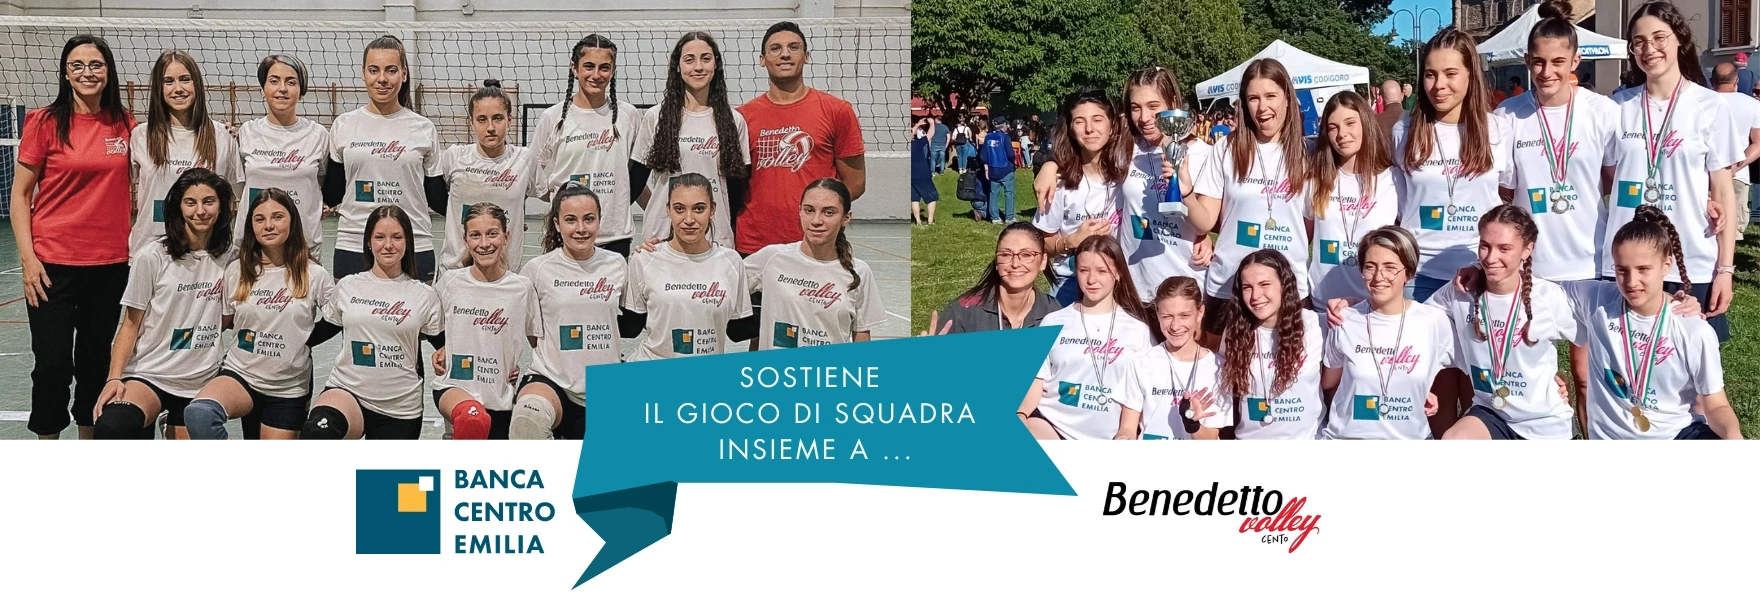 Benedetto VOLLEY Format Sponsor Sito (1) 